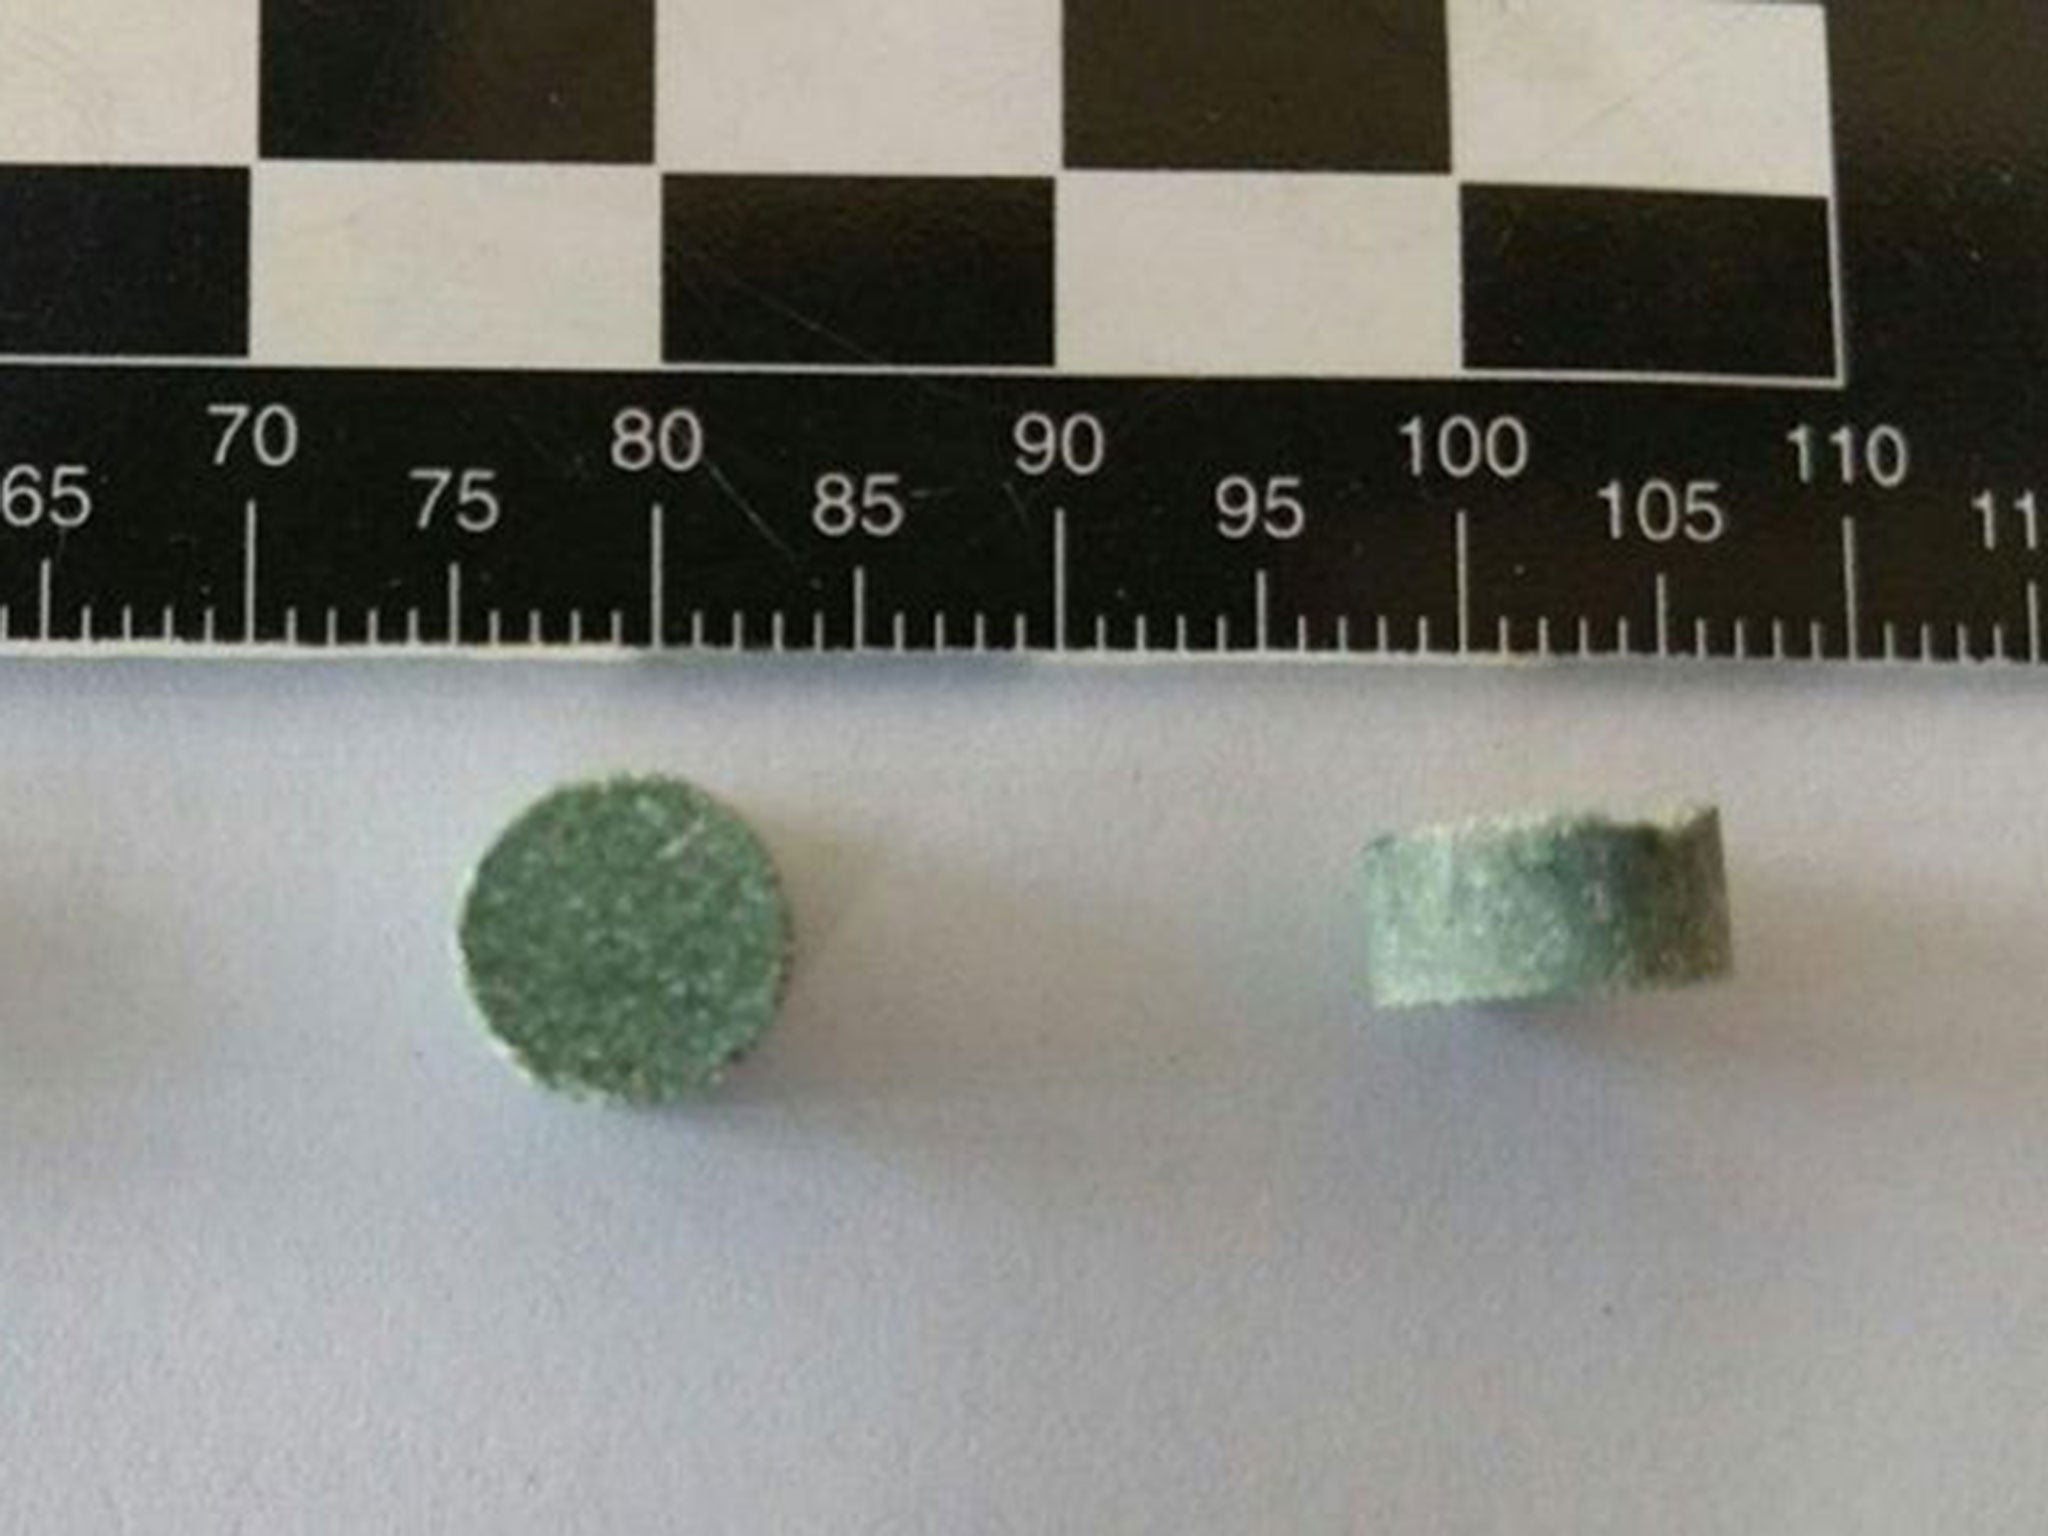 Cumbria Police have released this image of the suspected drugs